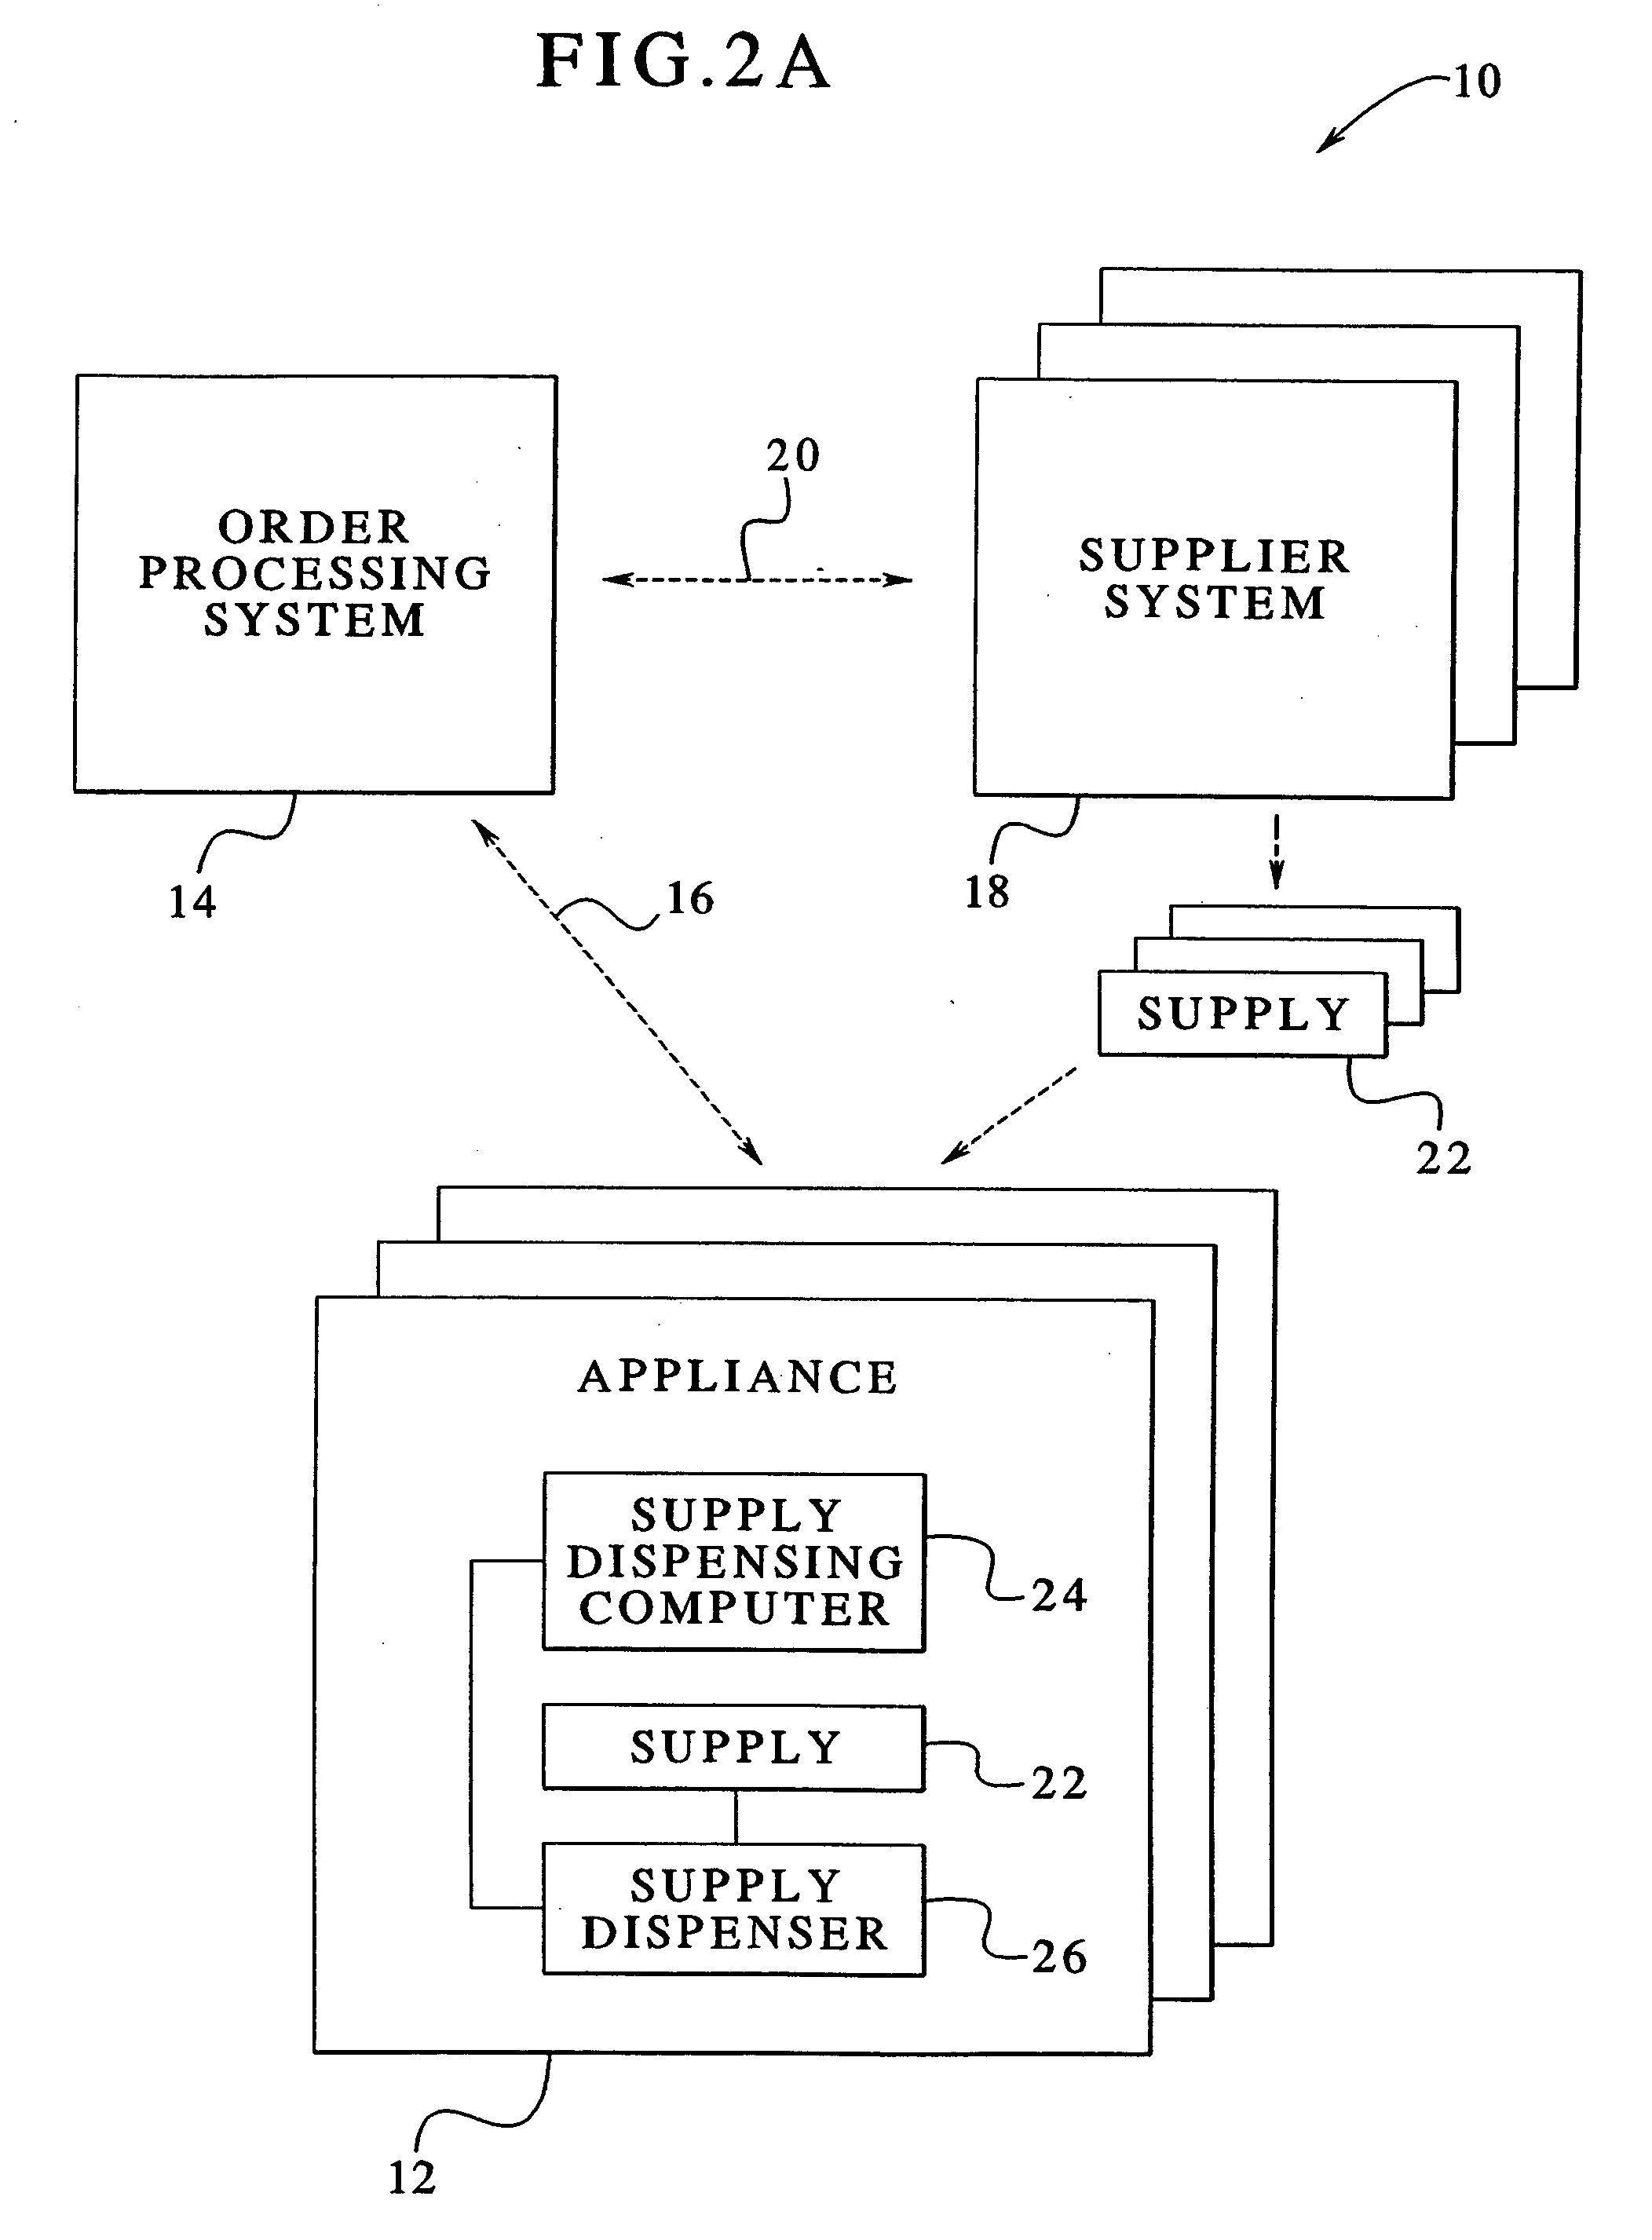 Washing machine operable with supply distribution, dispensing and use system method